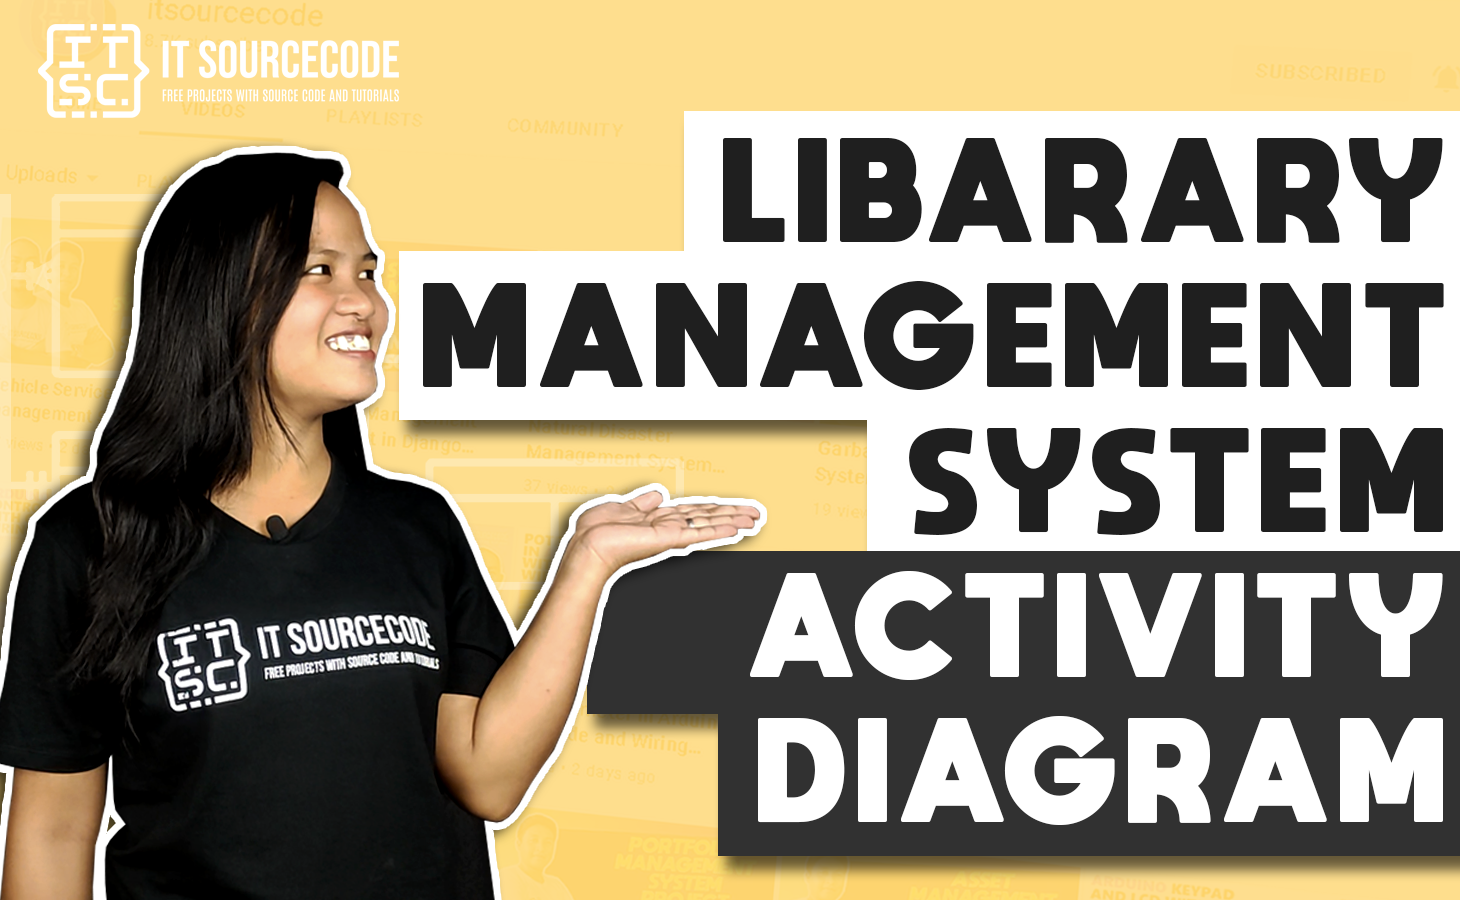 Library Management System Activity Diagram